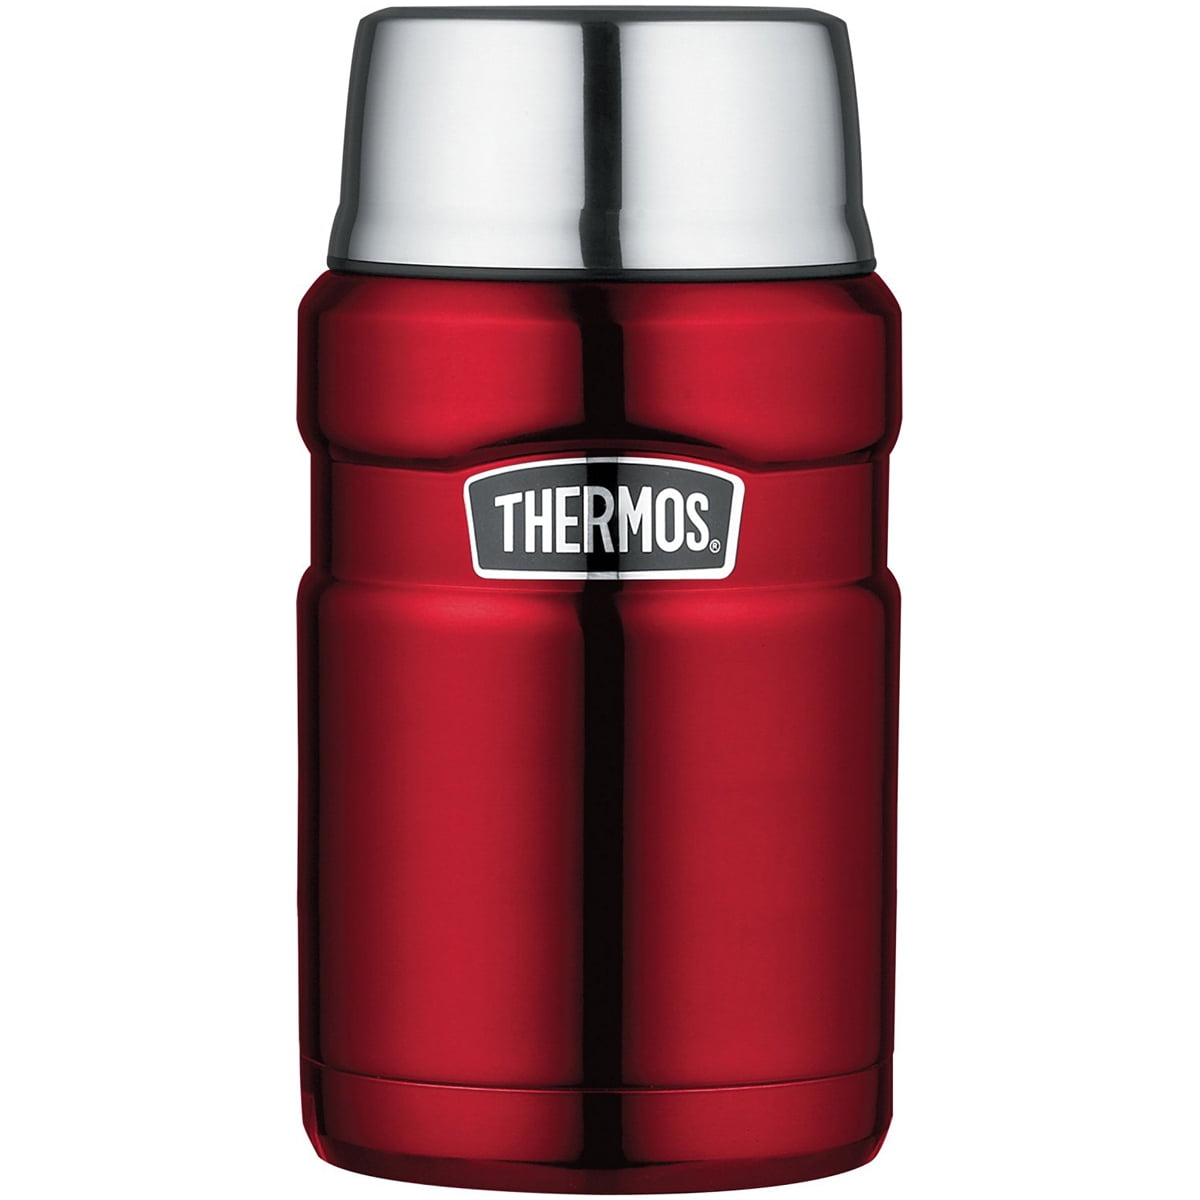 Thermos King 24 Ounce Food Jar, Stainless Steel